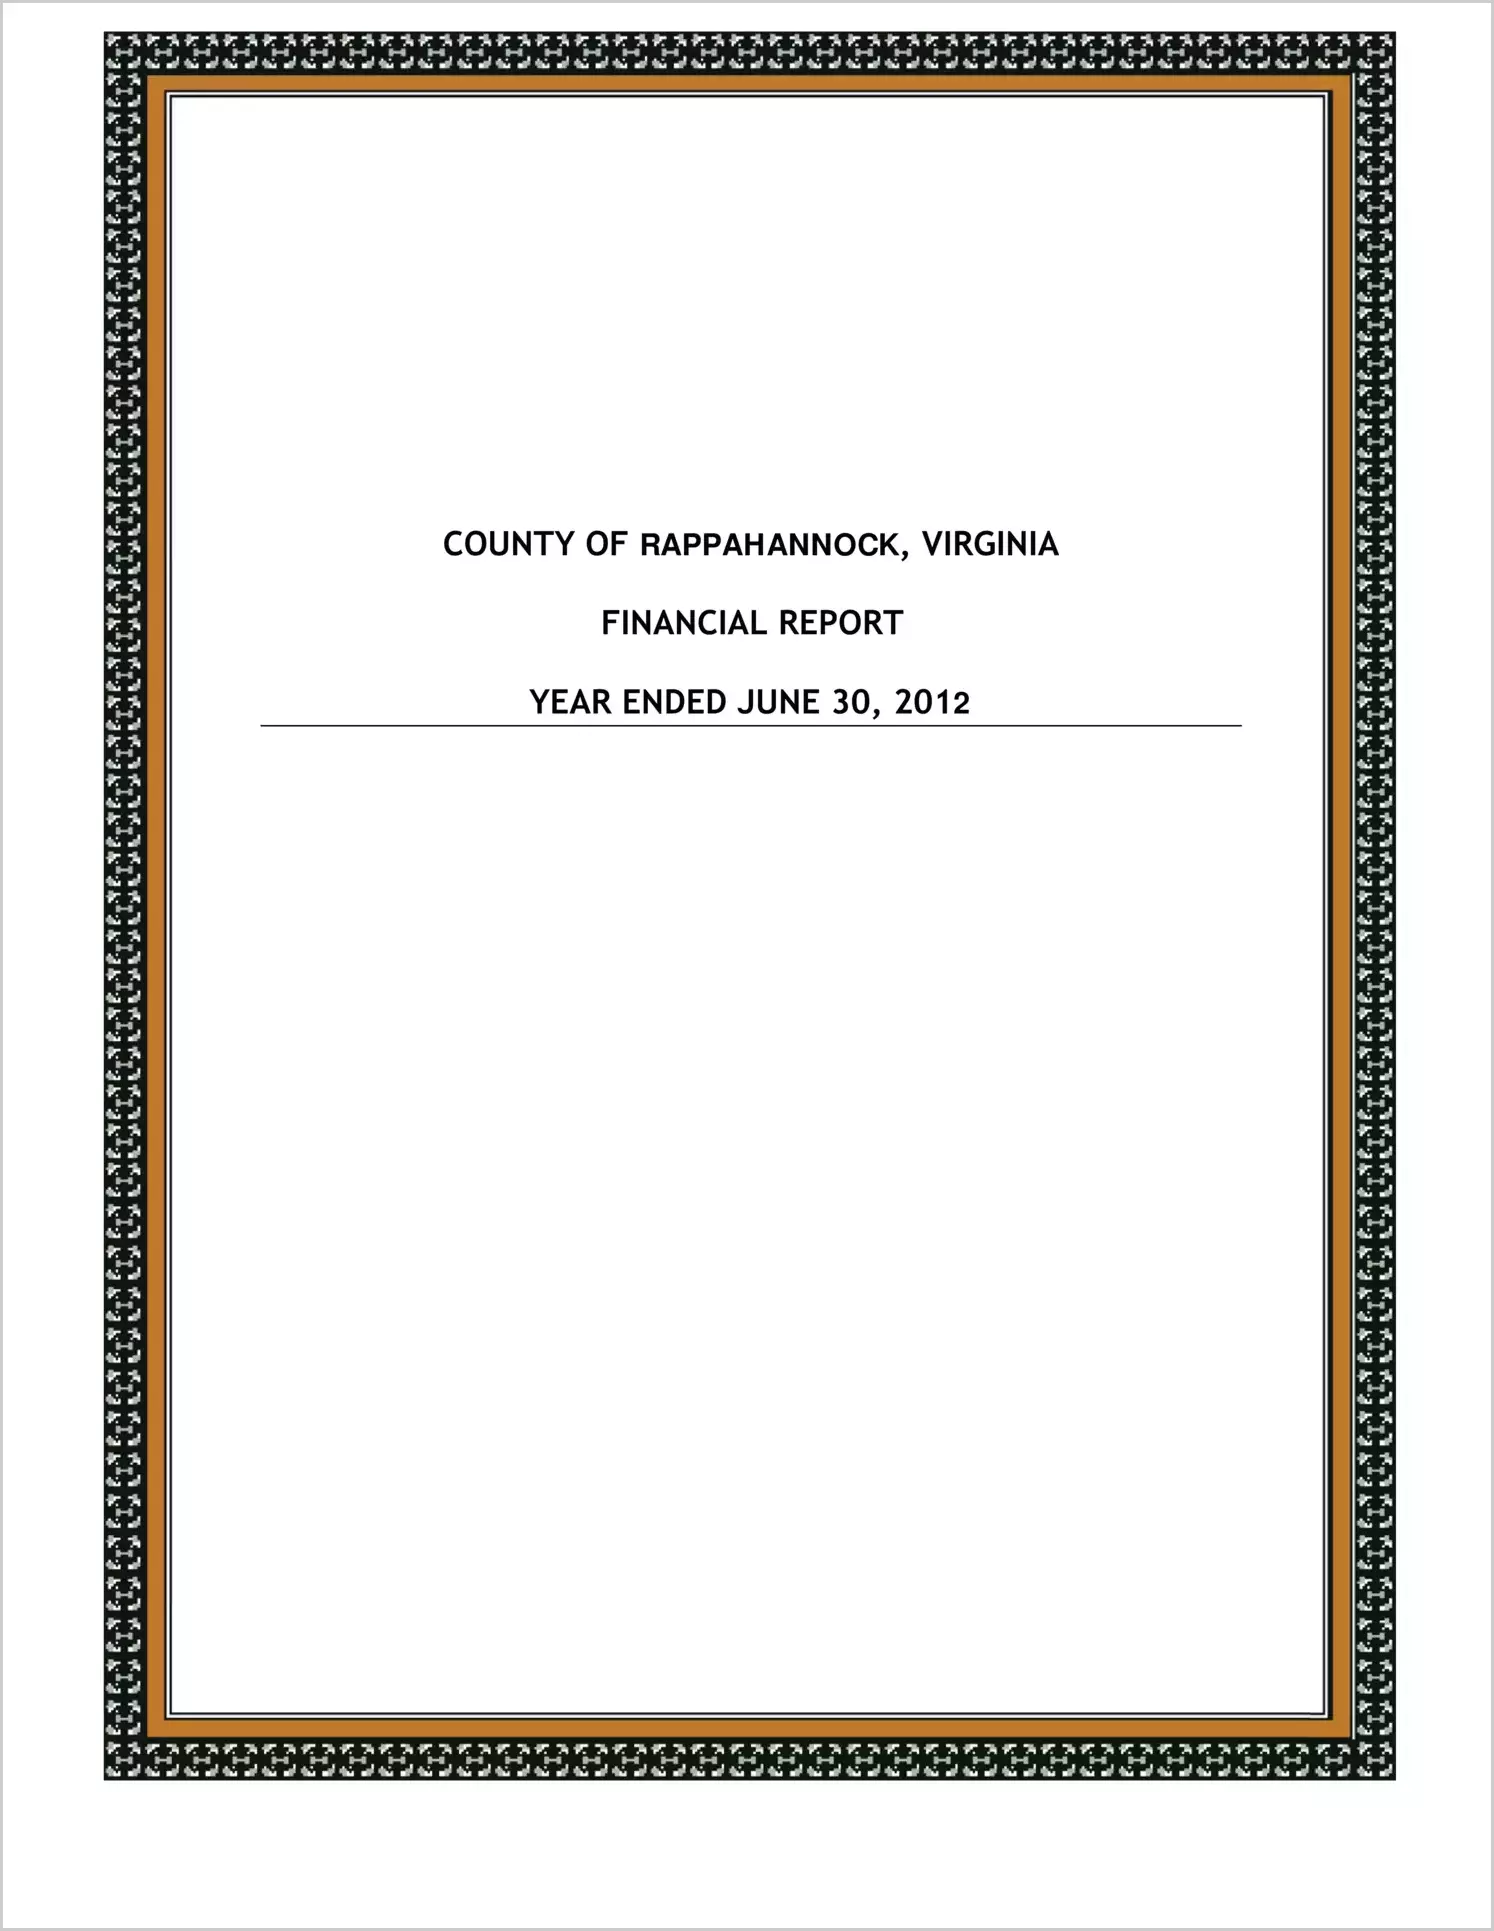 2012 Annual Financial Report for County of Rappahannock